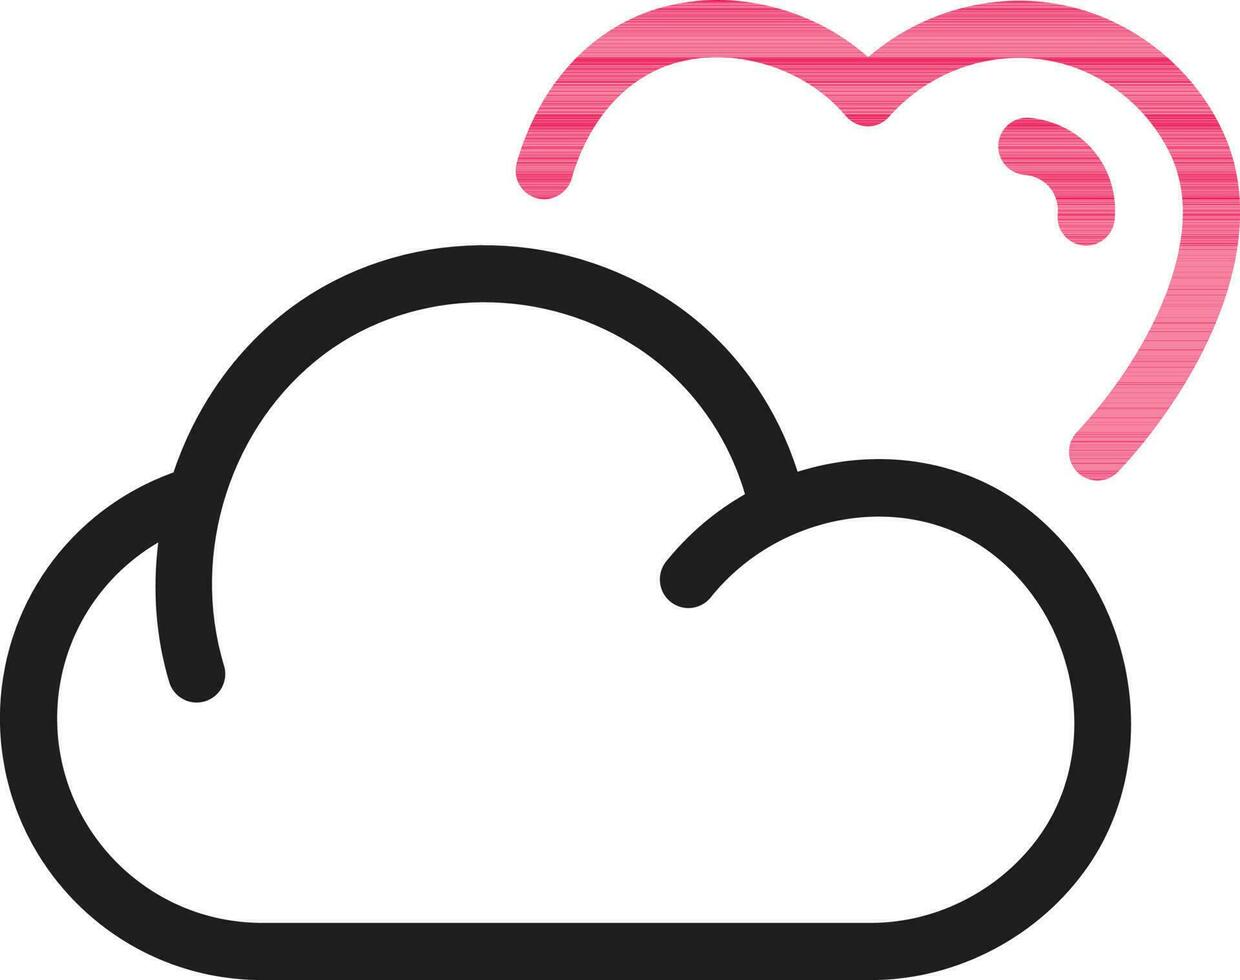 Line Art Clouds Icon in Black and Pink Color. vector